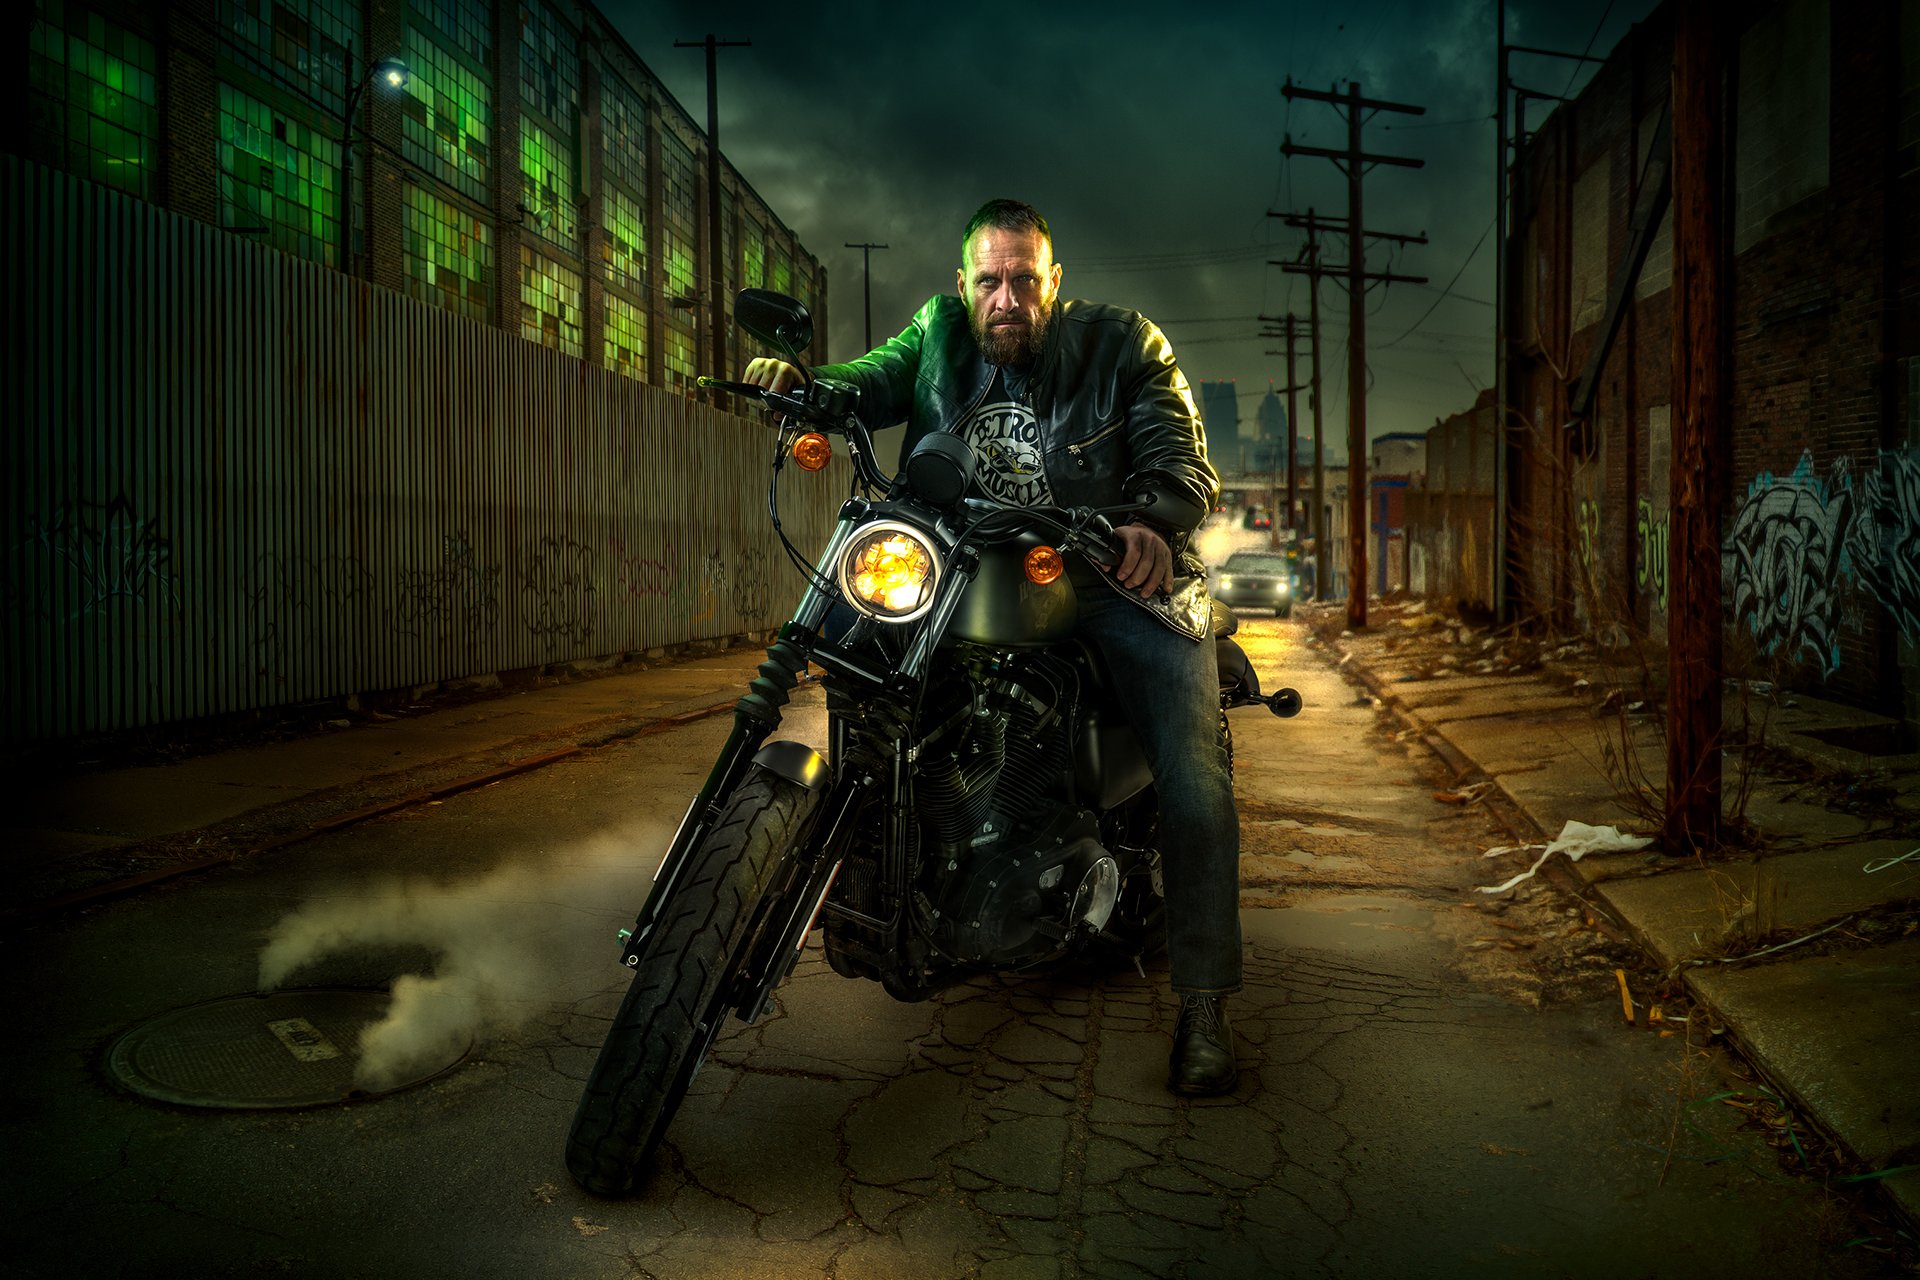 Chris Clor Gives a Cinematic Look to His Harley Davidson Concept Work